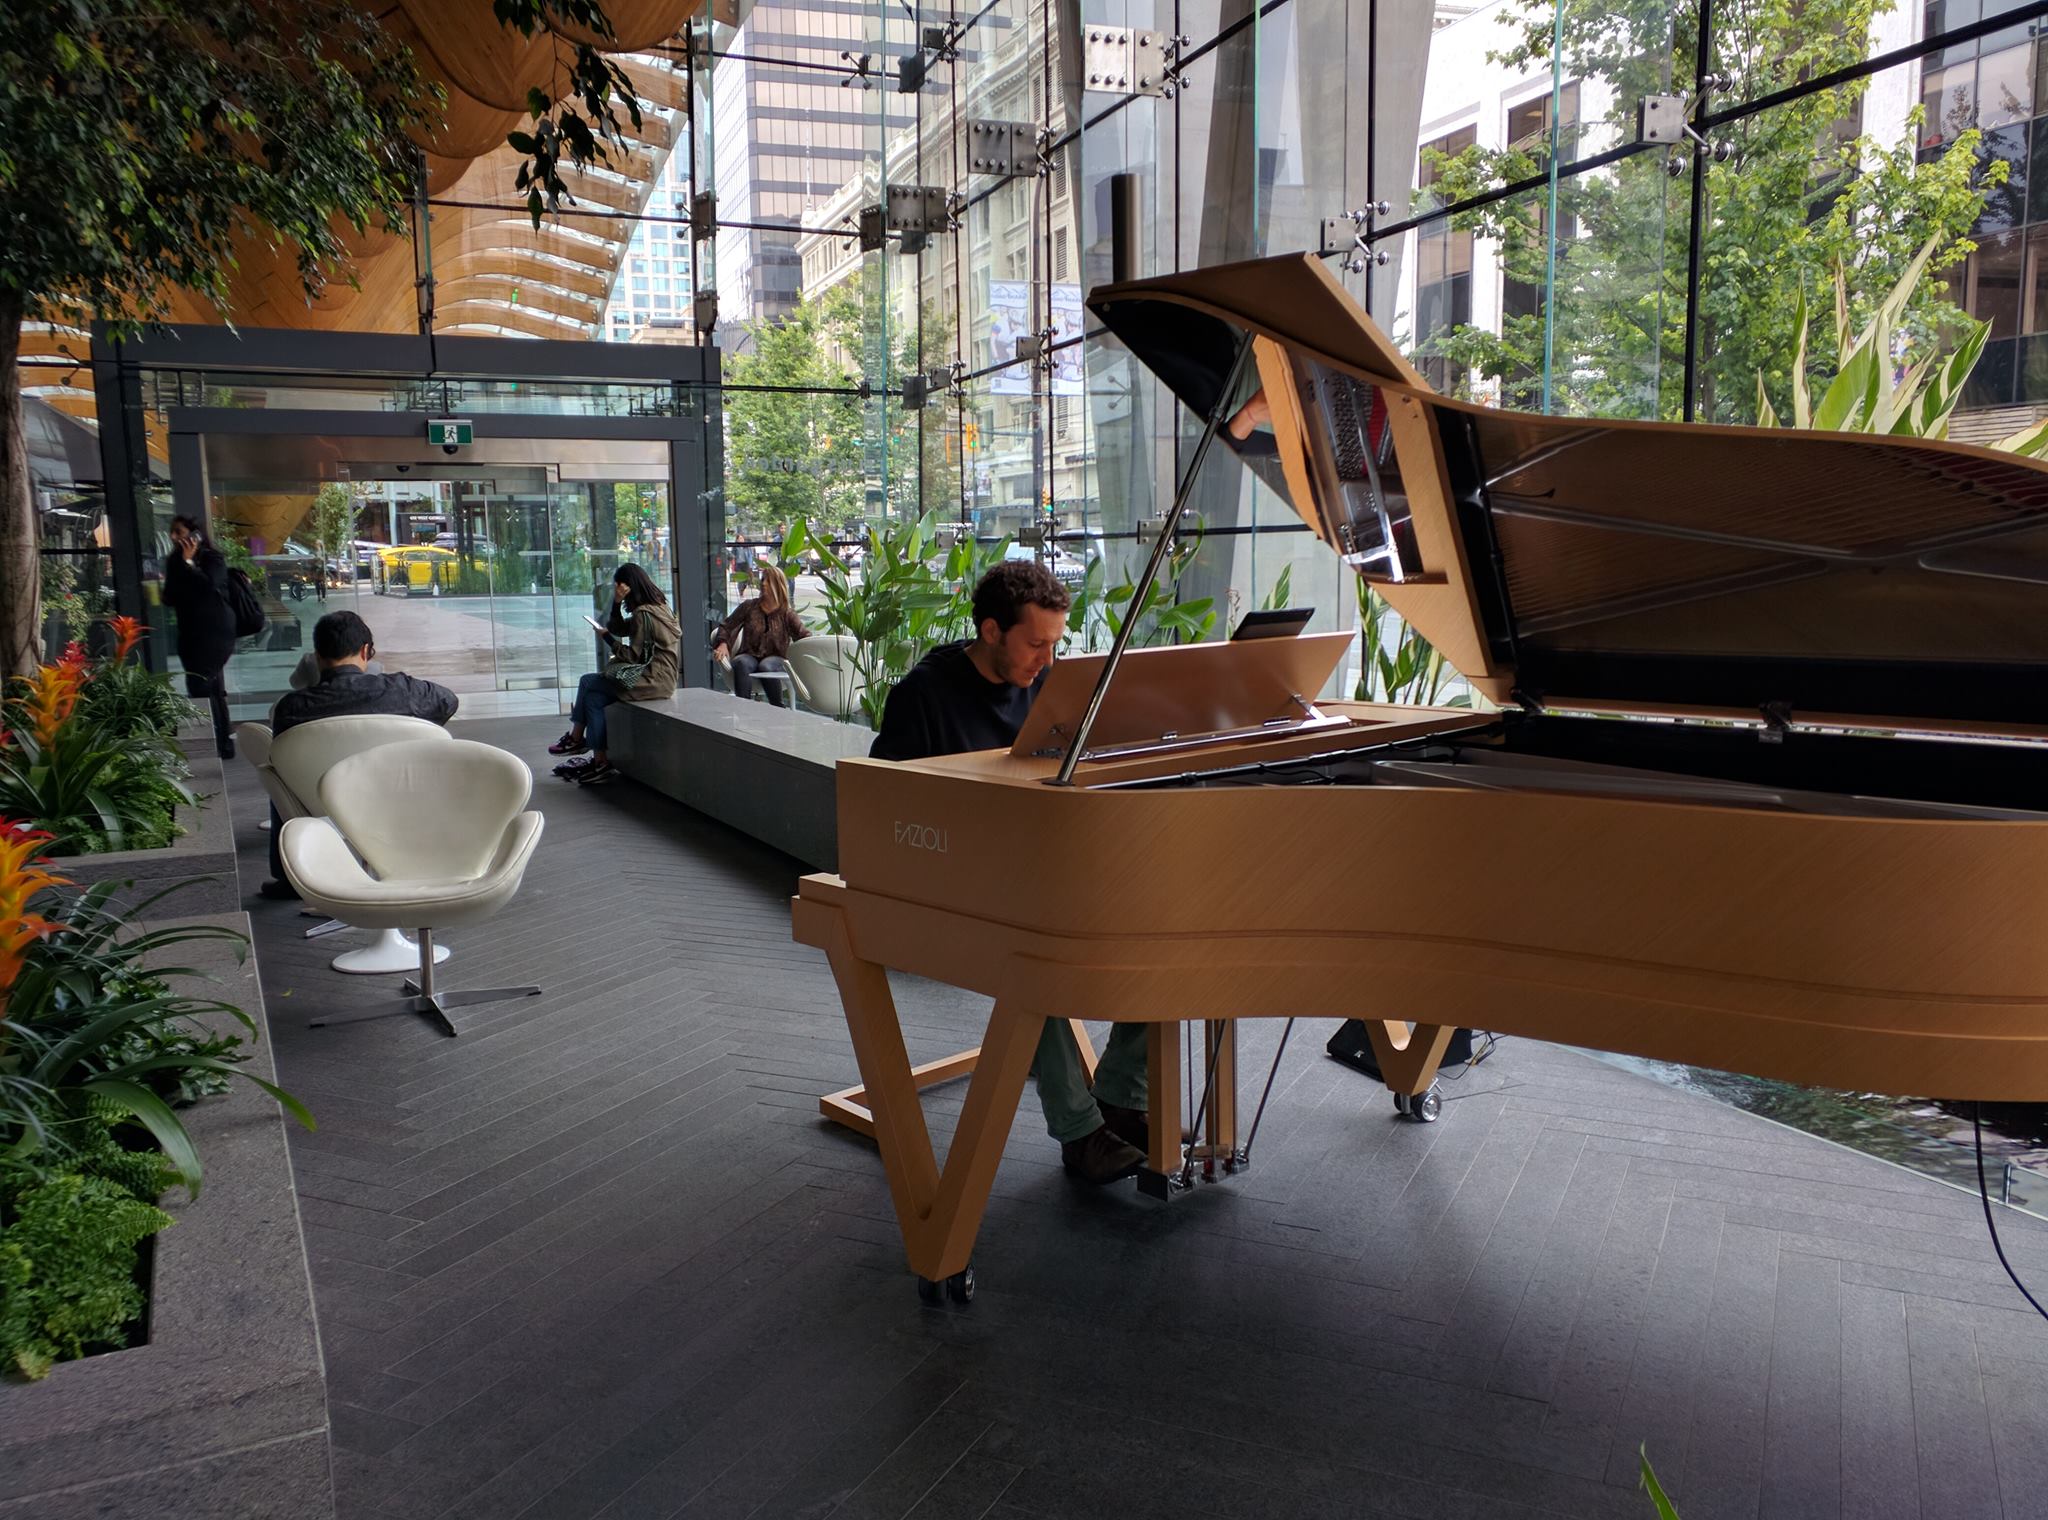 Pablo Pareja playing piano in Vancouver